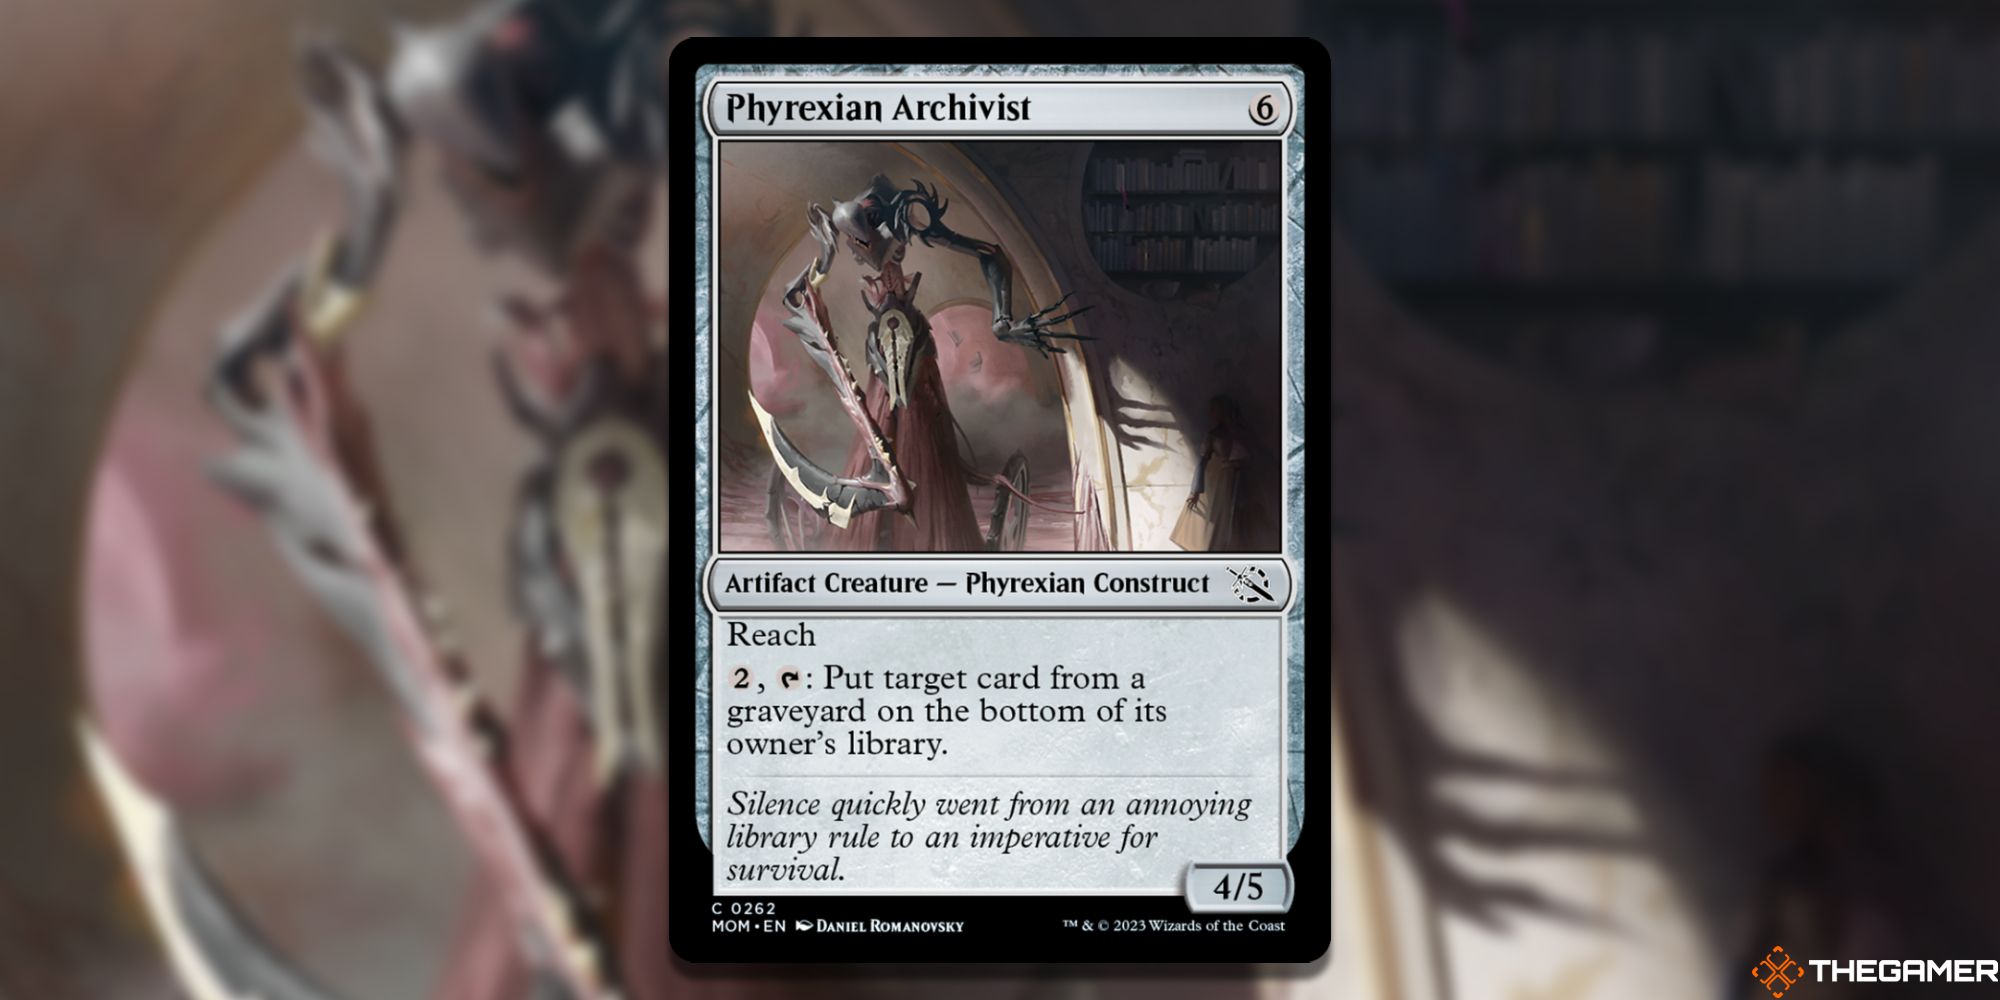 Image of the Phyrexian Archivist card from Magic: The Gathering, with art by Daniel Romanowski